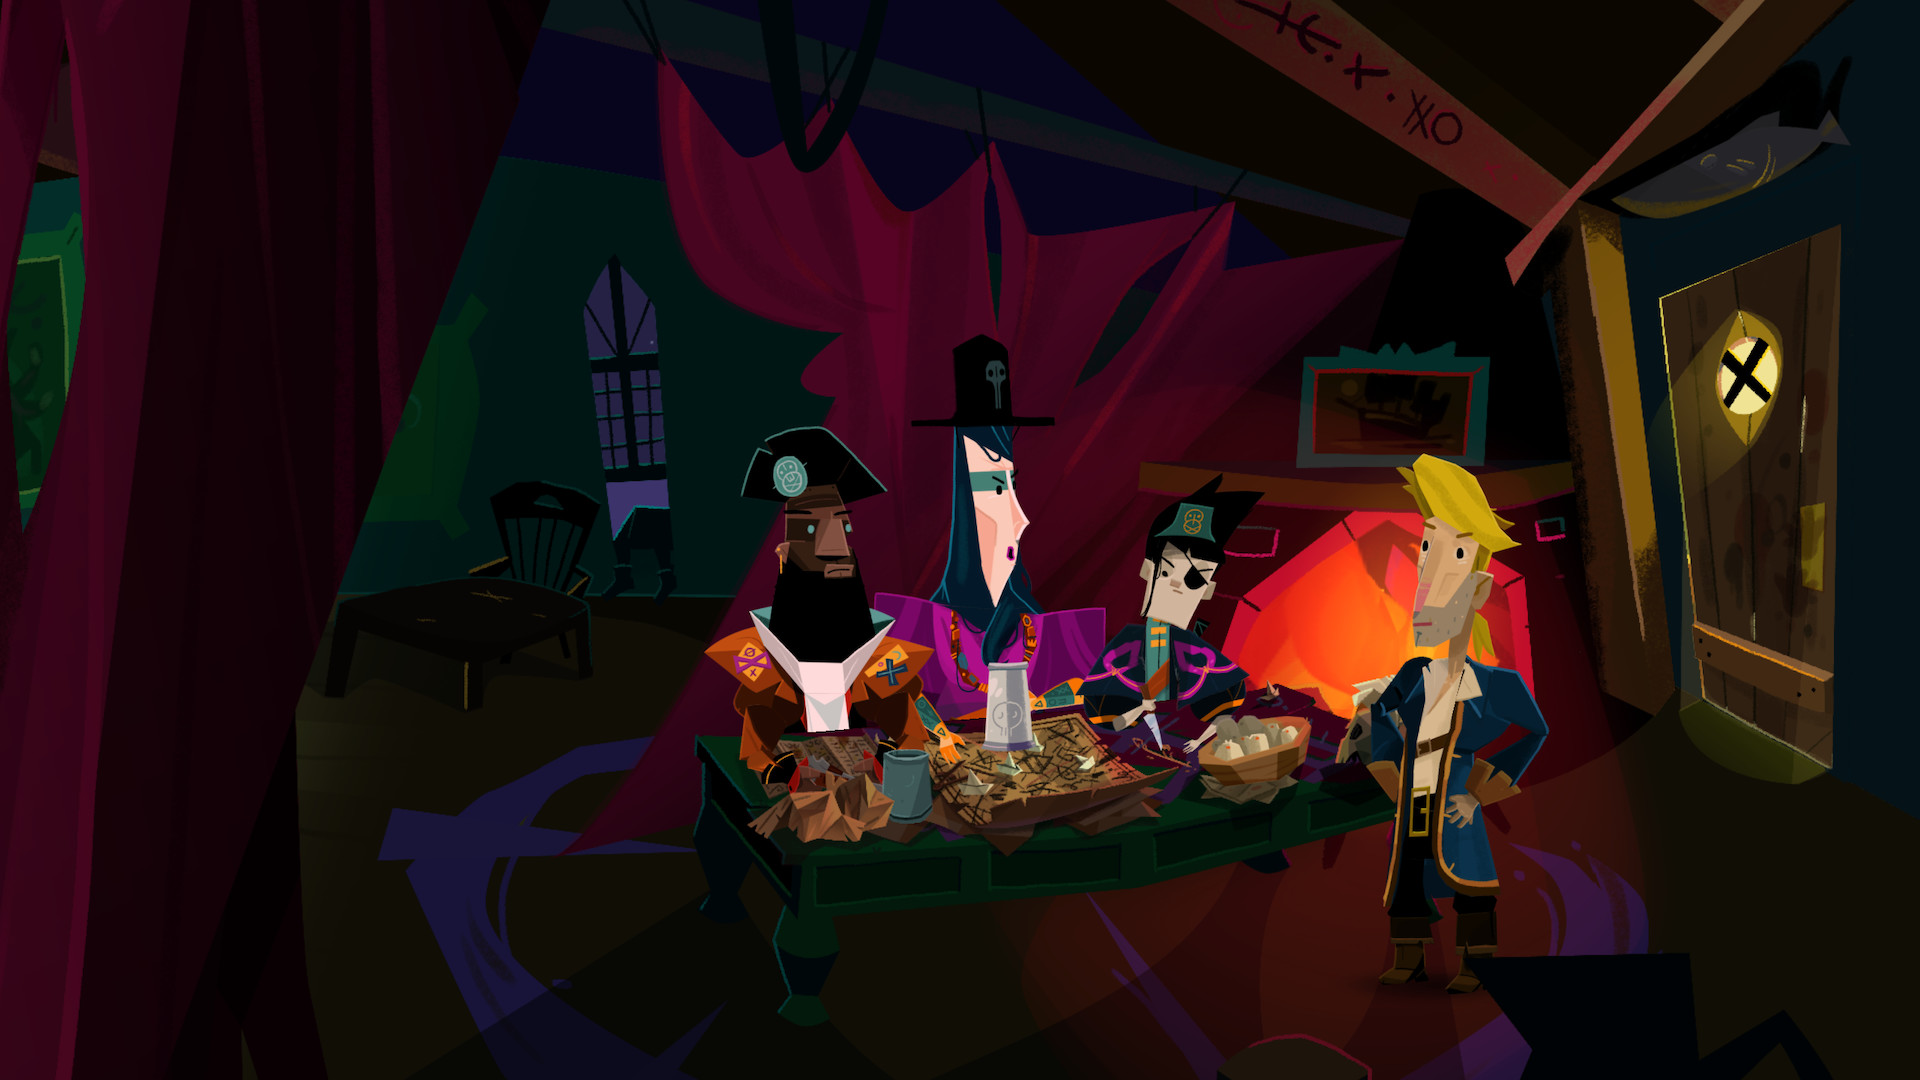 return to monkey island characters meeting in a pirate ship